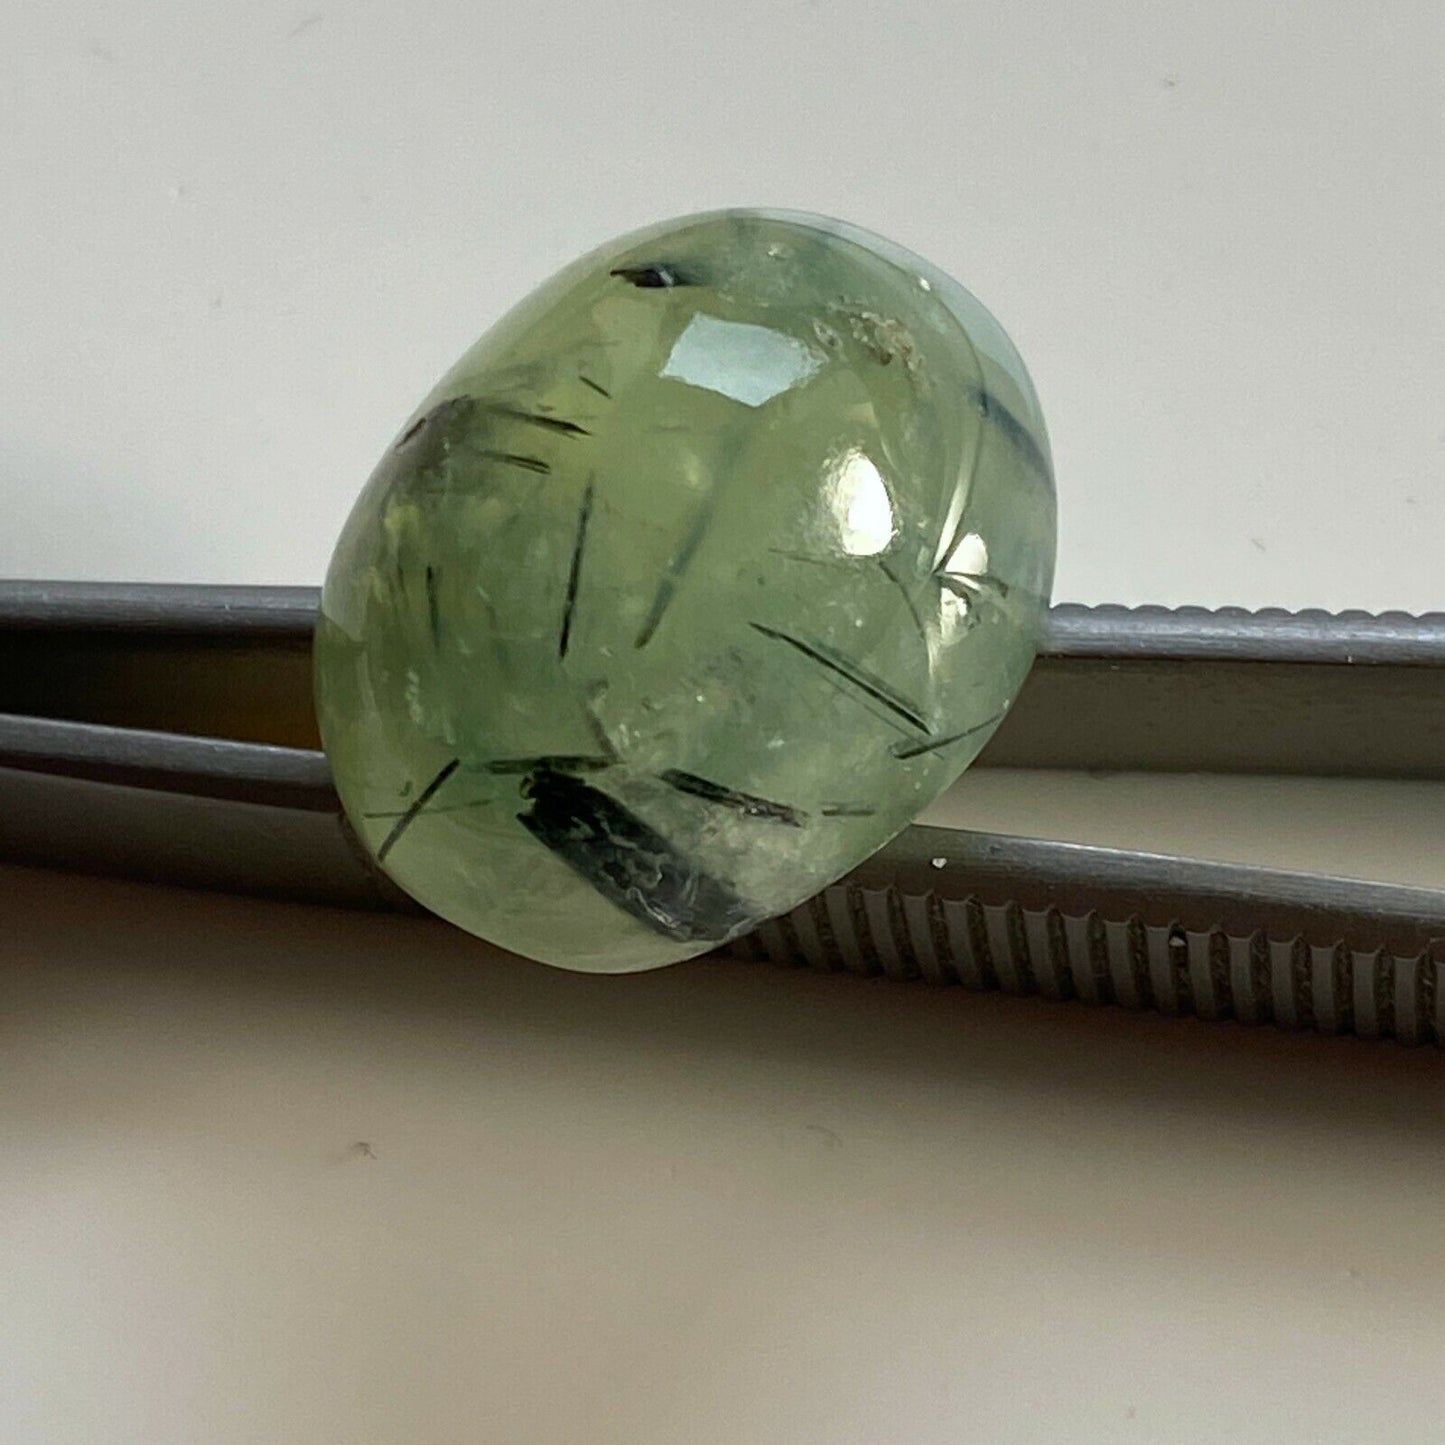 PREHNITE WITH TOURMALINE  INCLUSIONS NATURAL MINED UNTREATED 32.12Ct  MF443